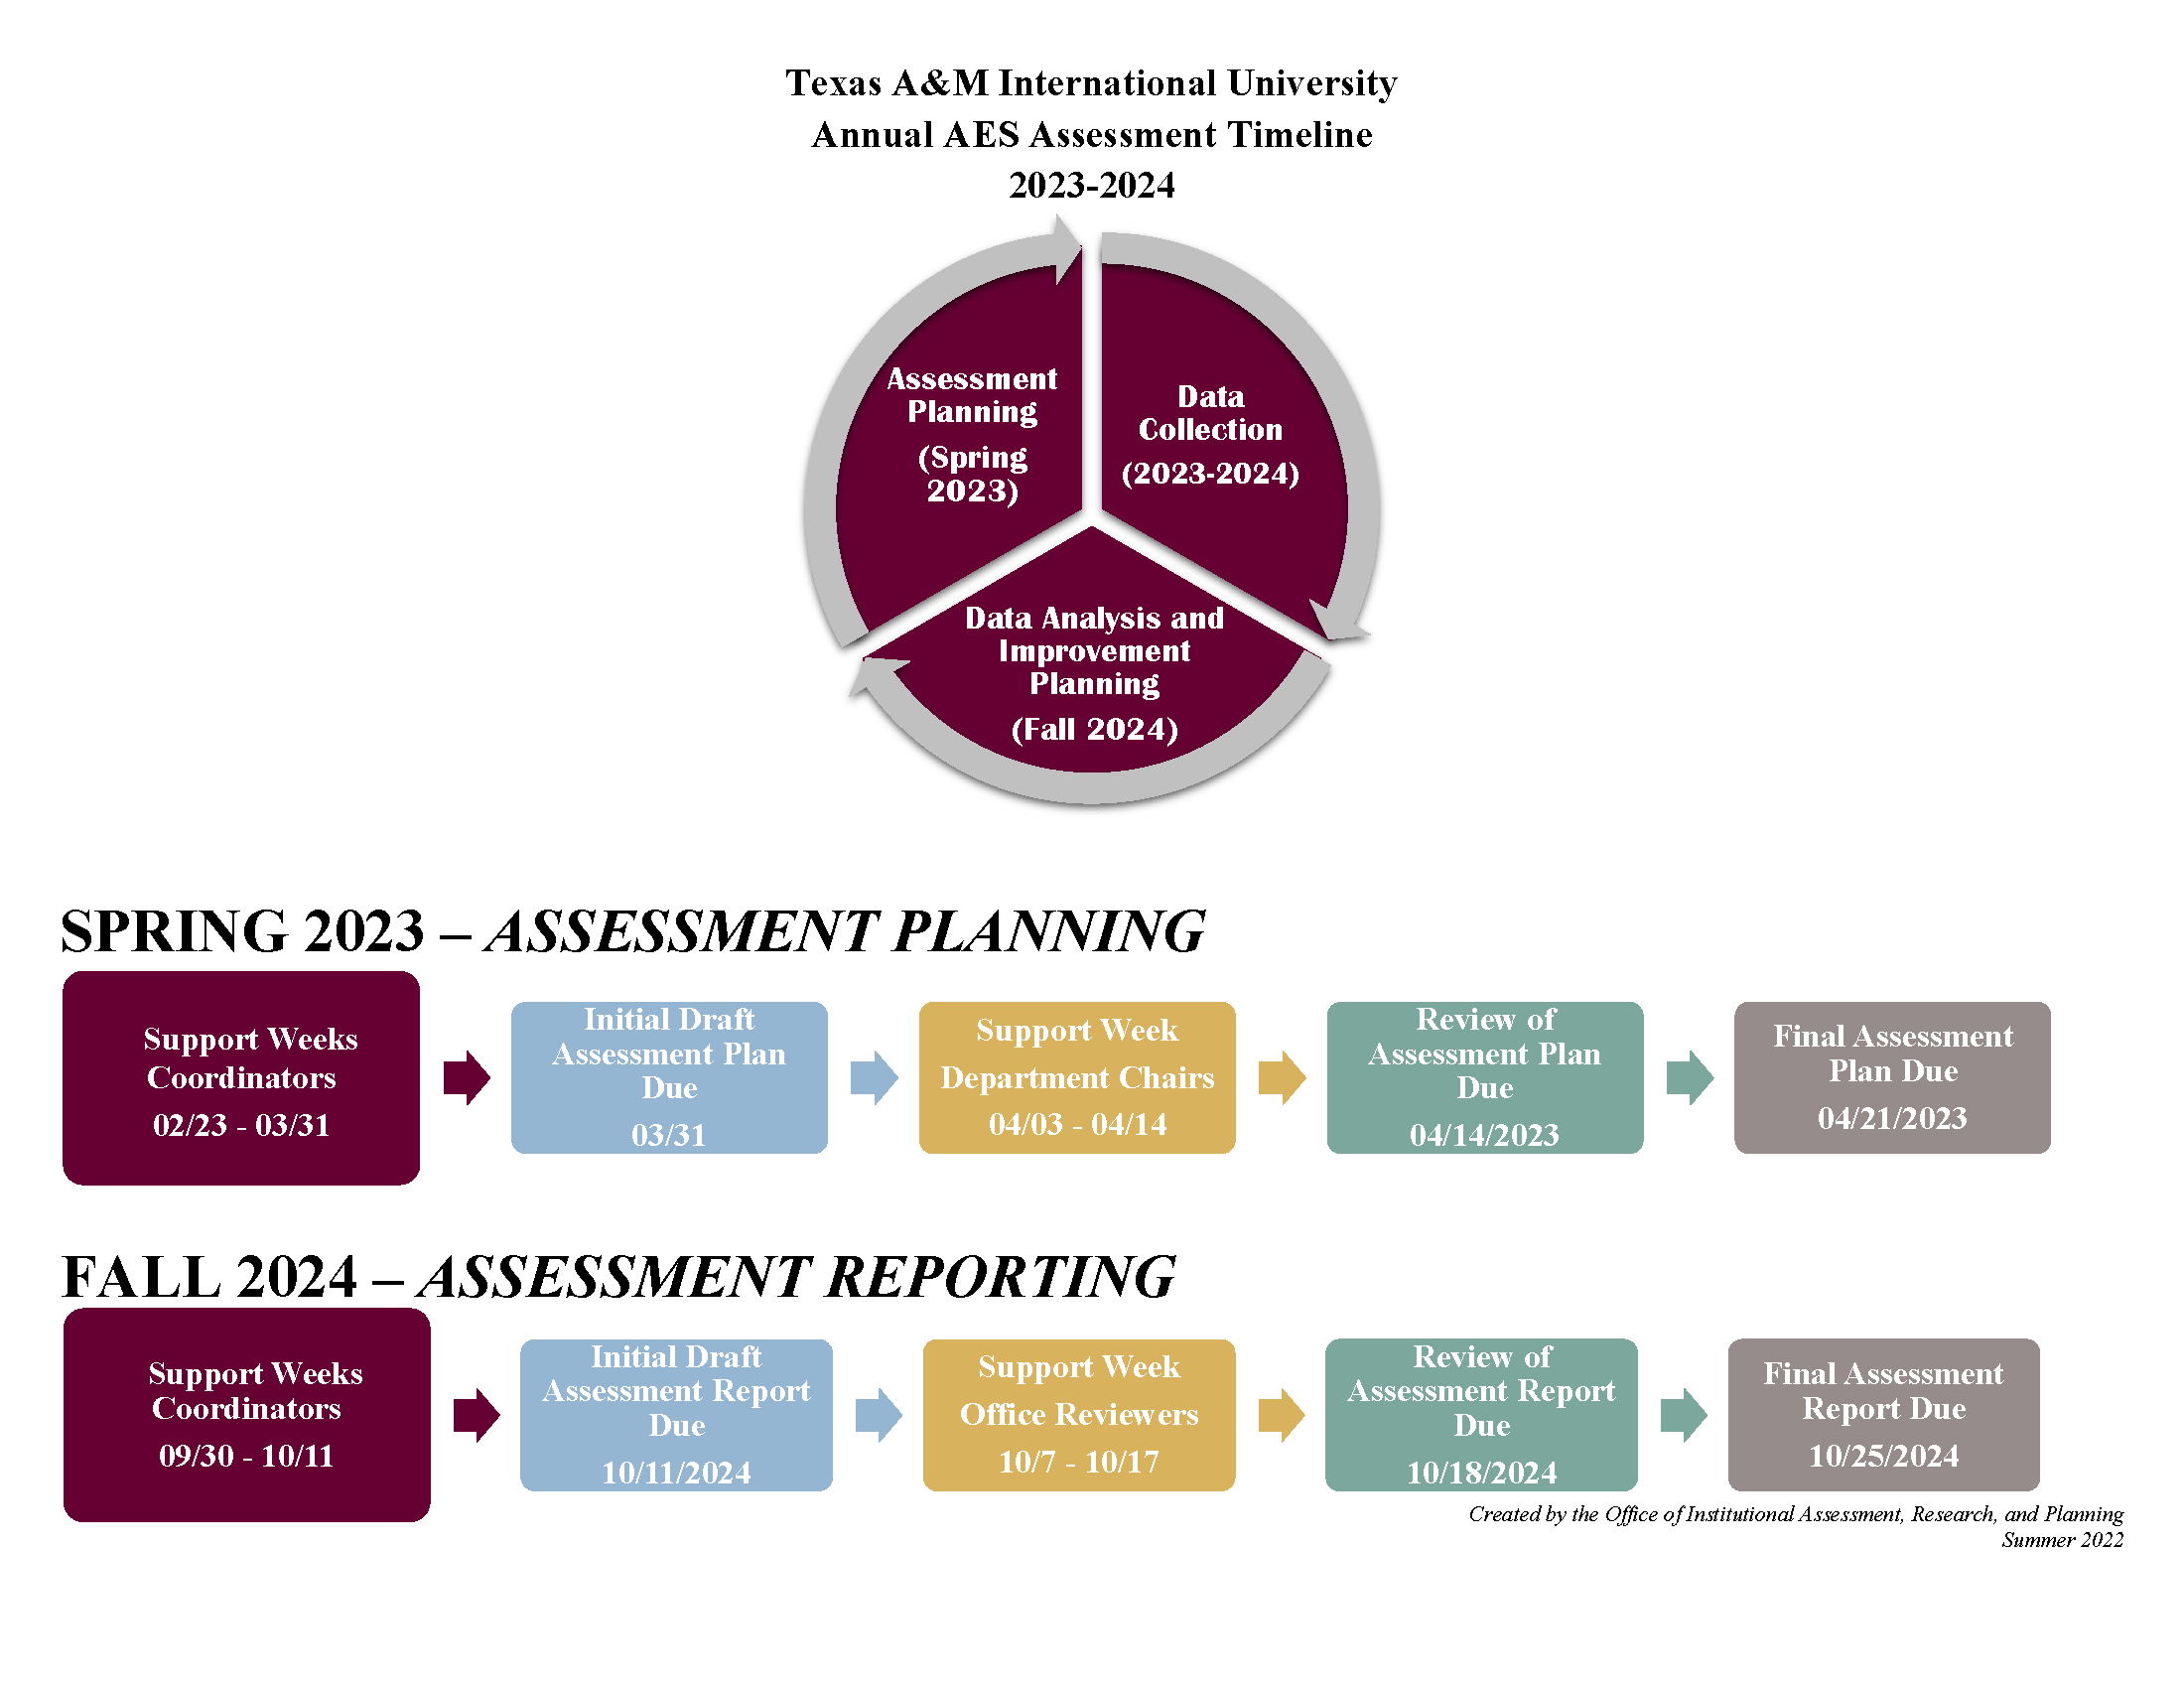 2023-2024 AES Assessment Timeline Picture